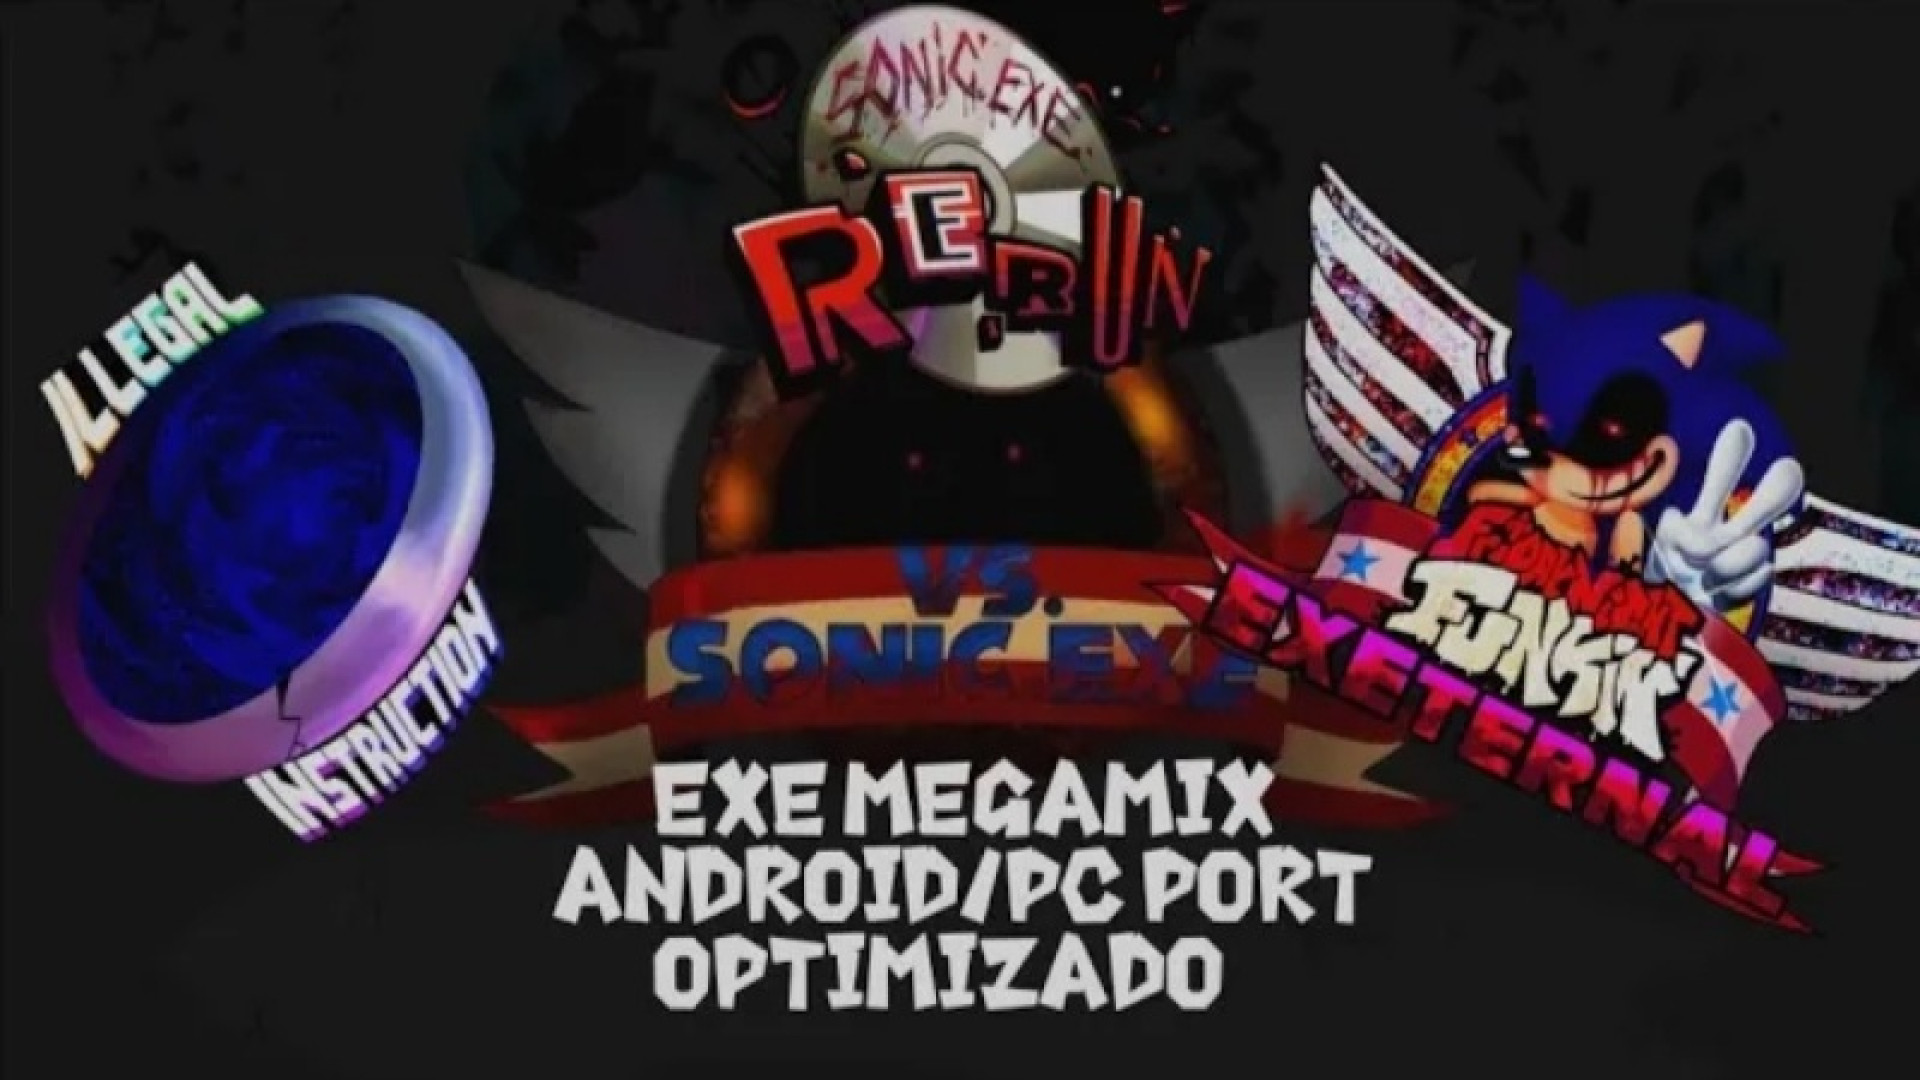 FNF VS Sonic.exe Confronting Yourself Optimizado para Android